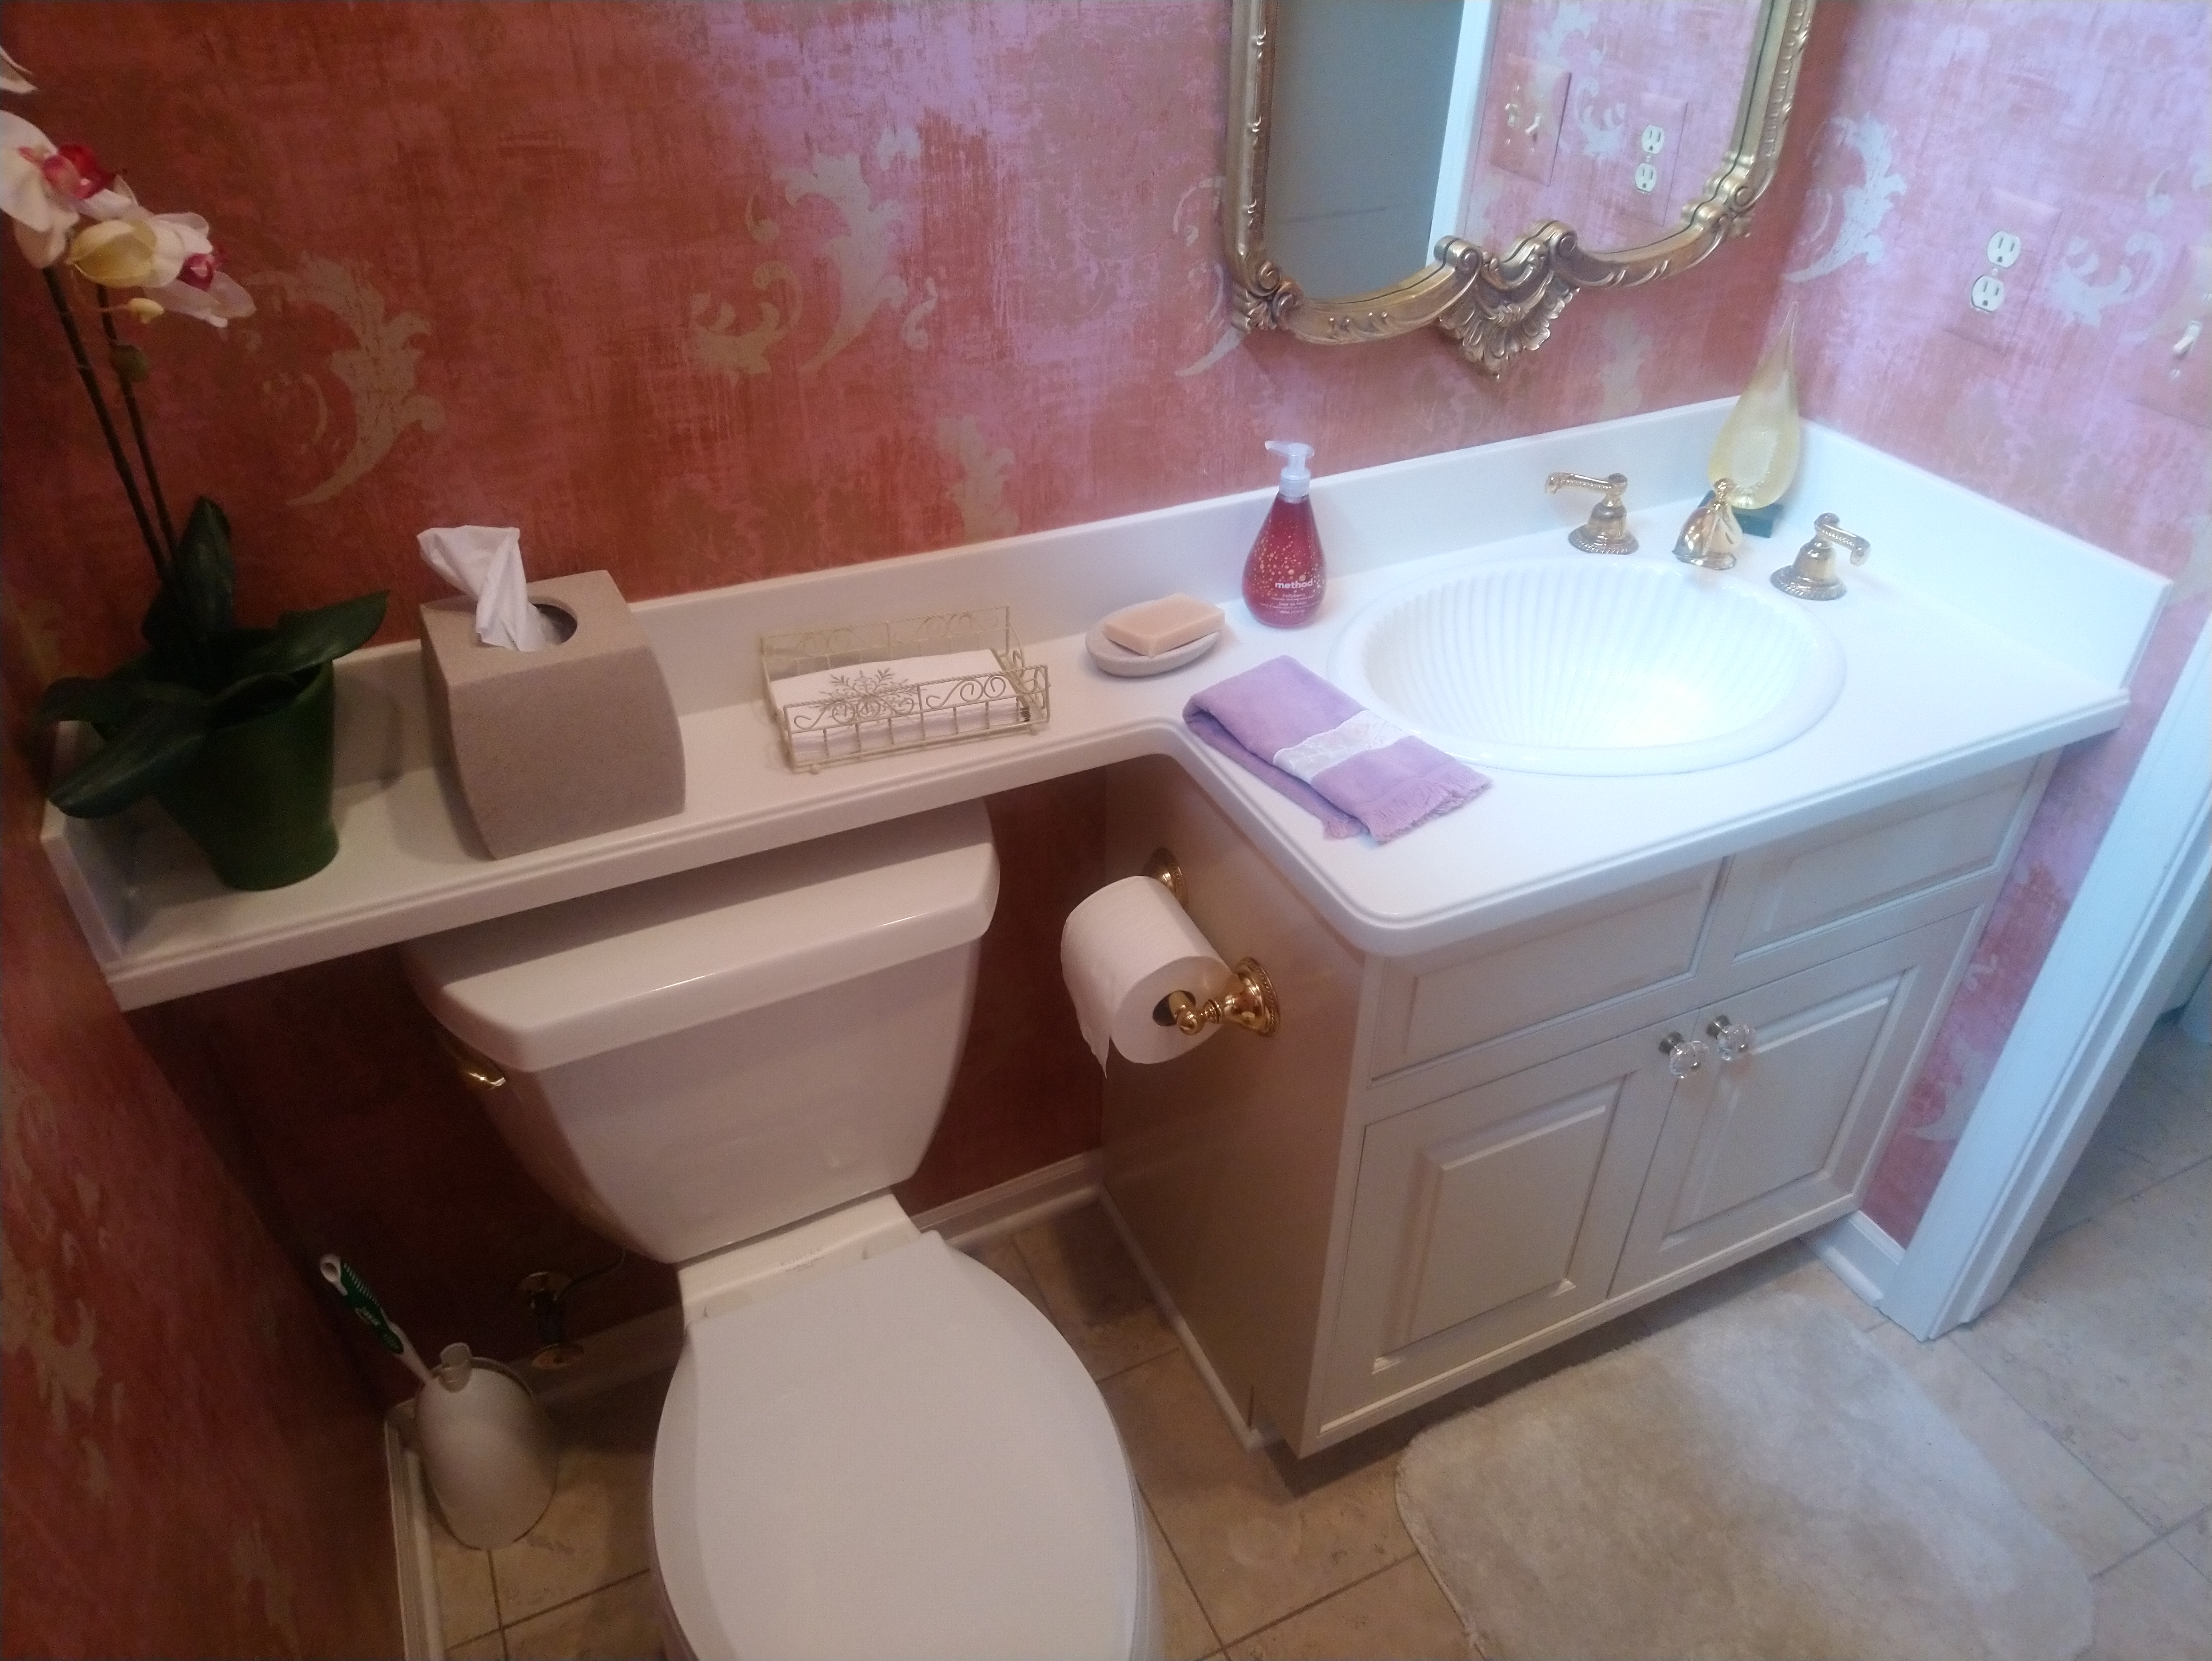 Before photo of the same style half bath showing wall to wall countertop.